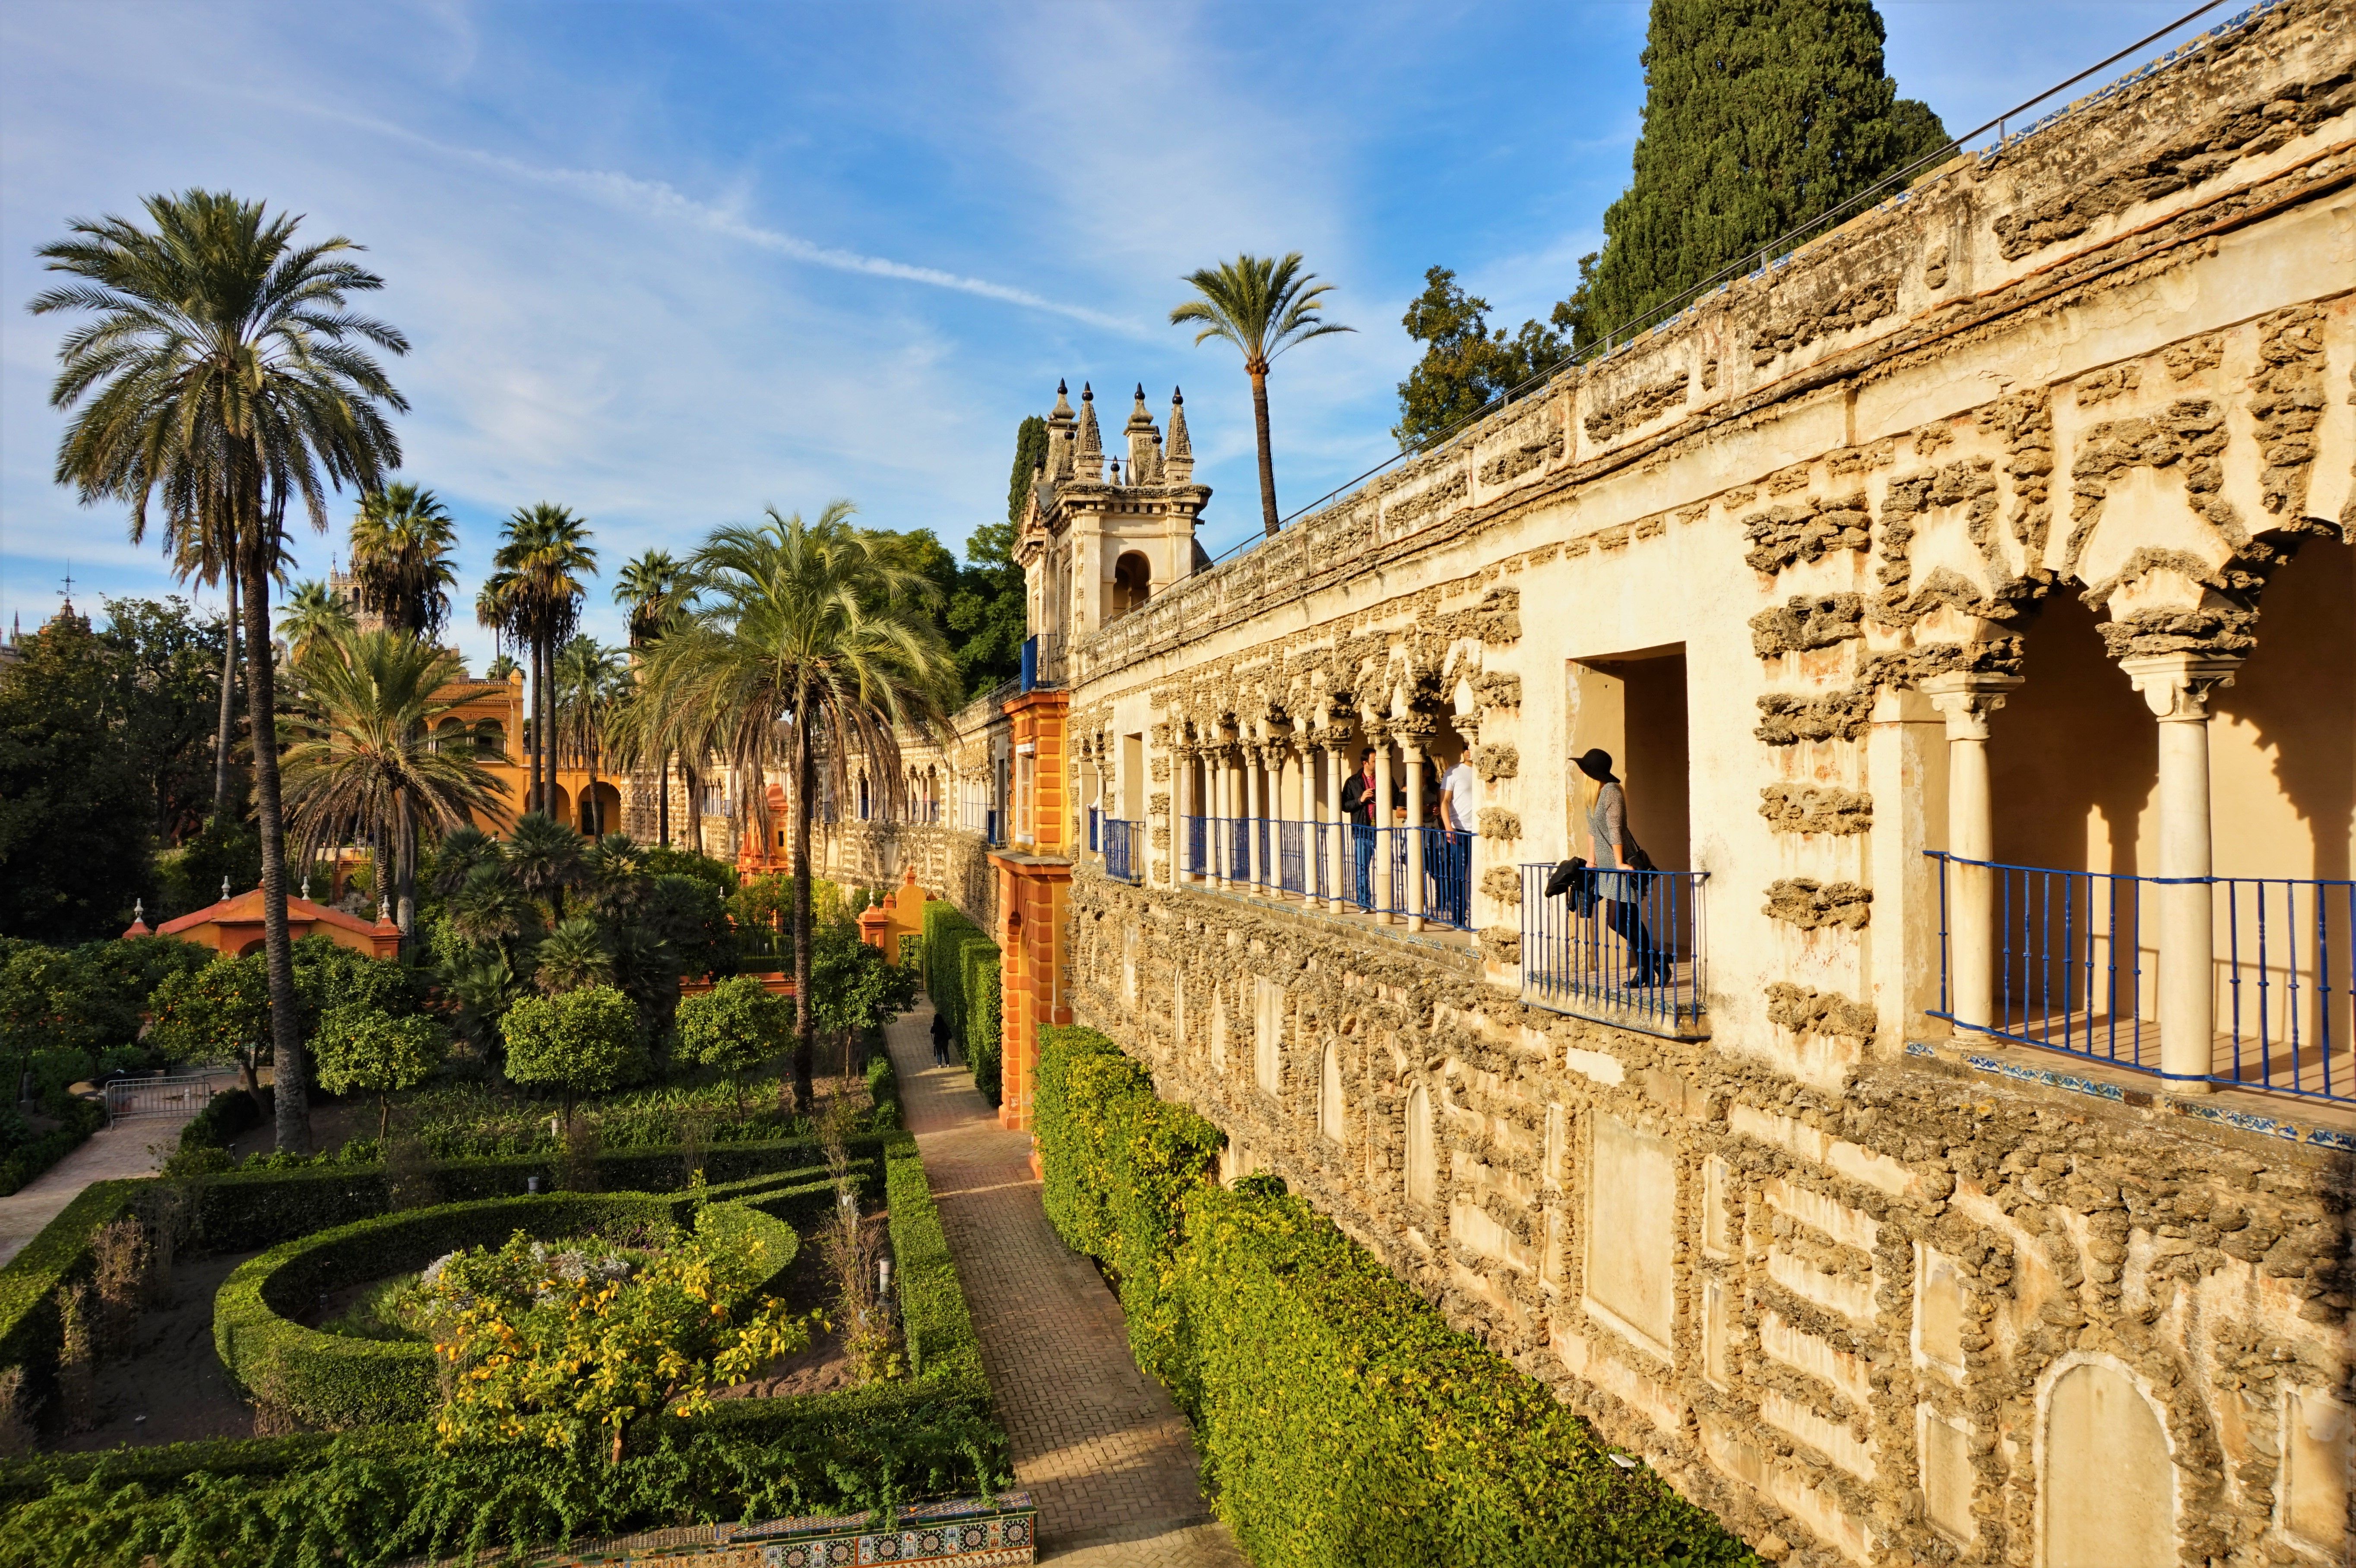 Visiting The Alcazar Of Seville Game Of Thrones Filming Location